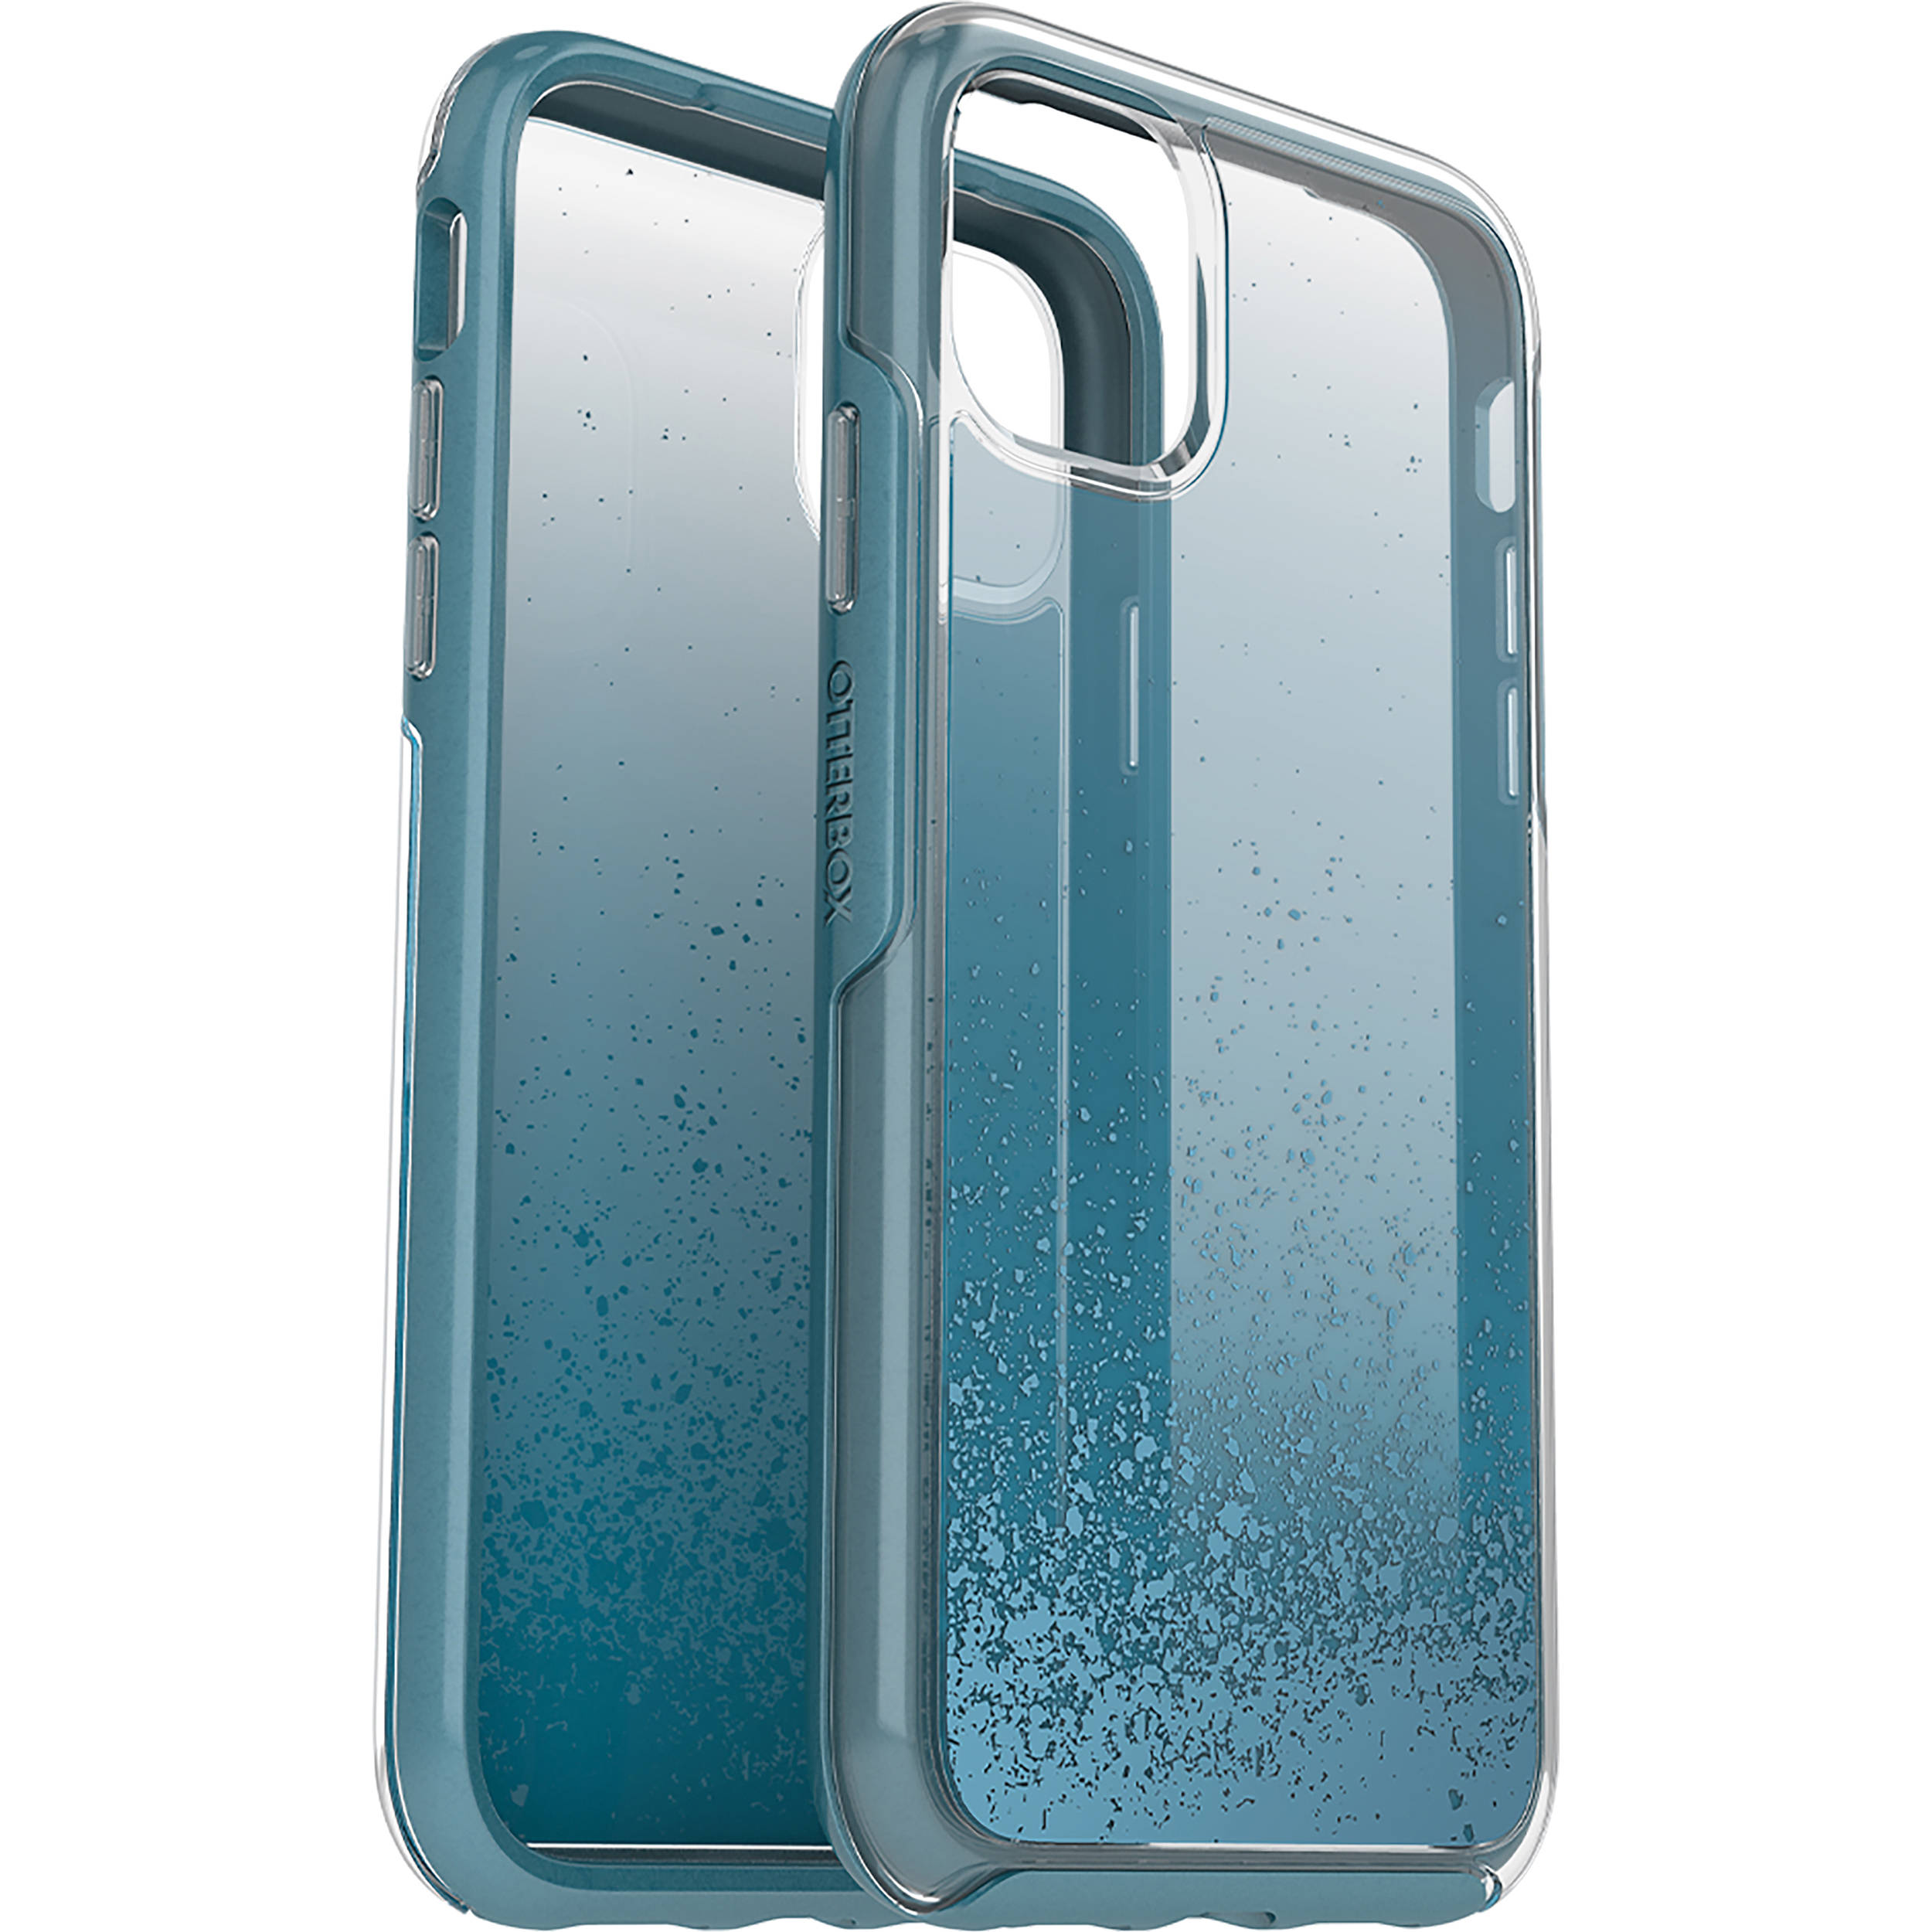 Otterbox Symmetry Series Case For Iphone 11 77 B H Photo